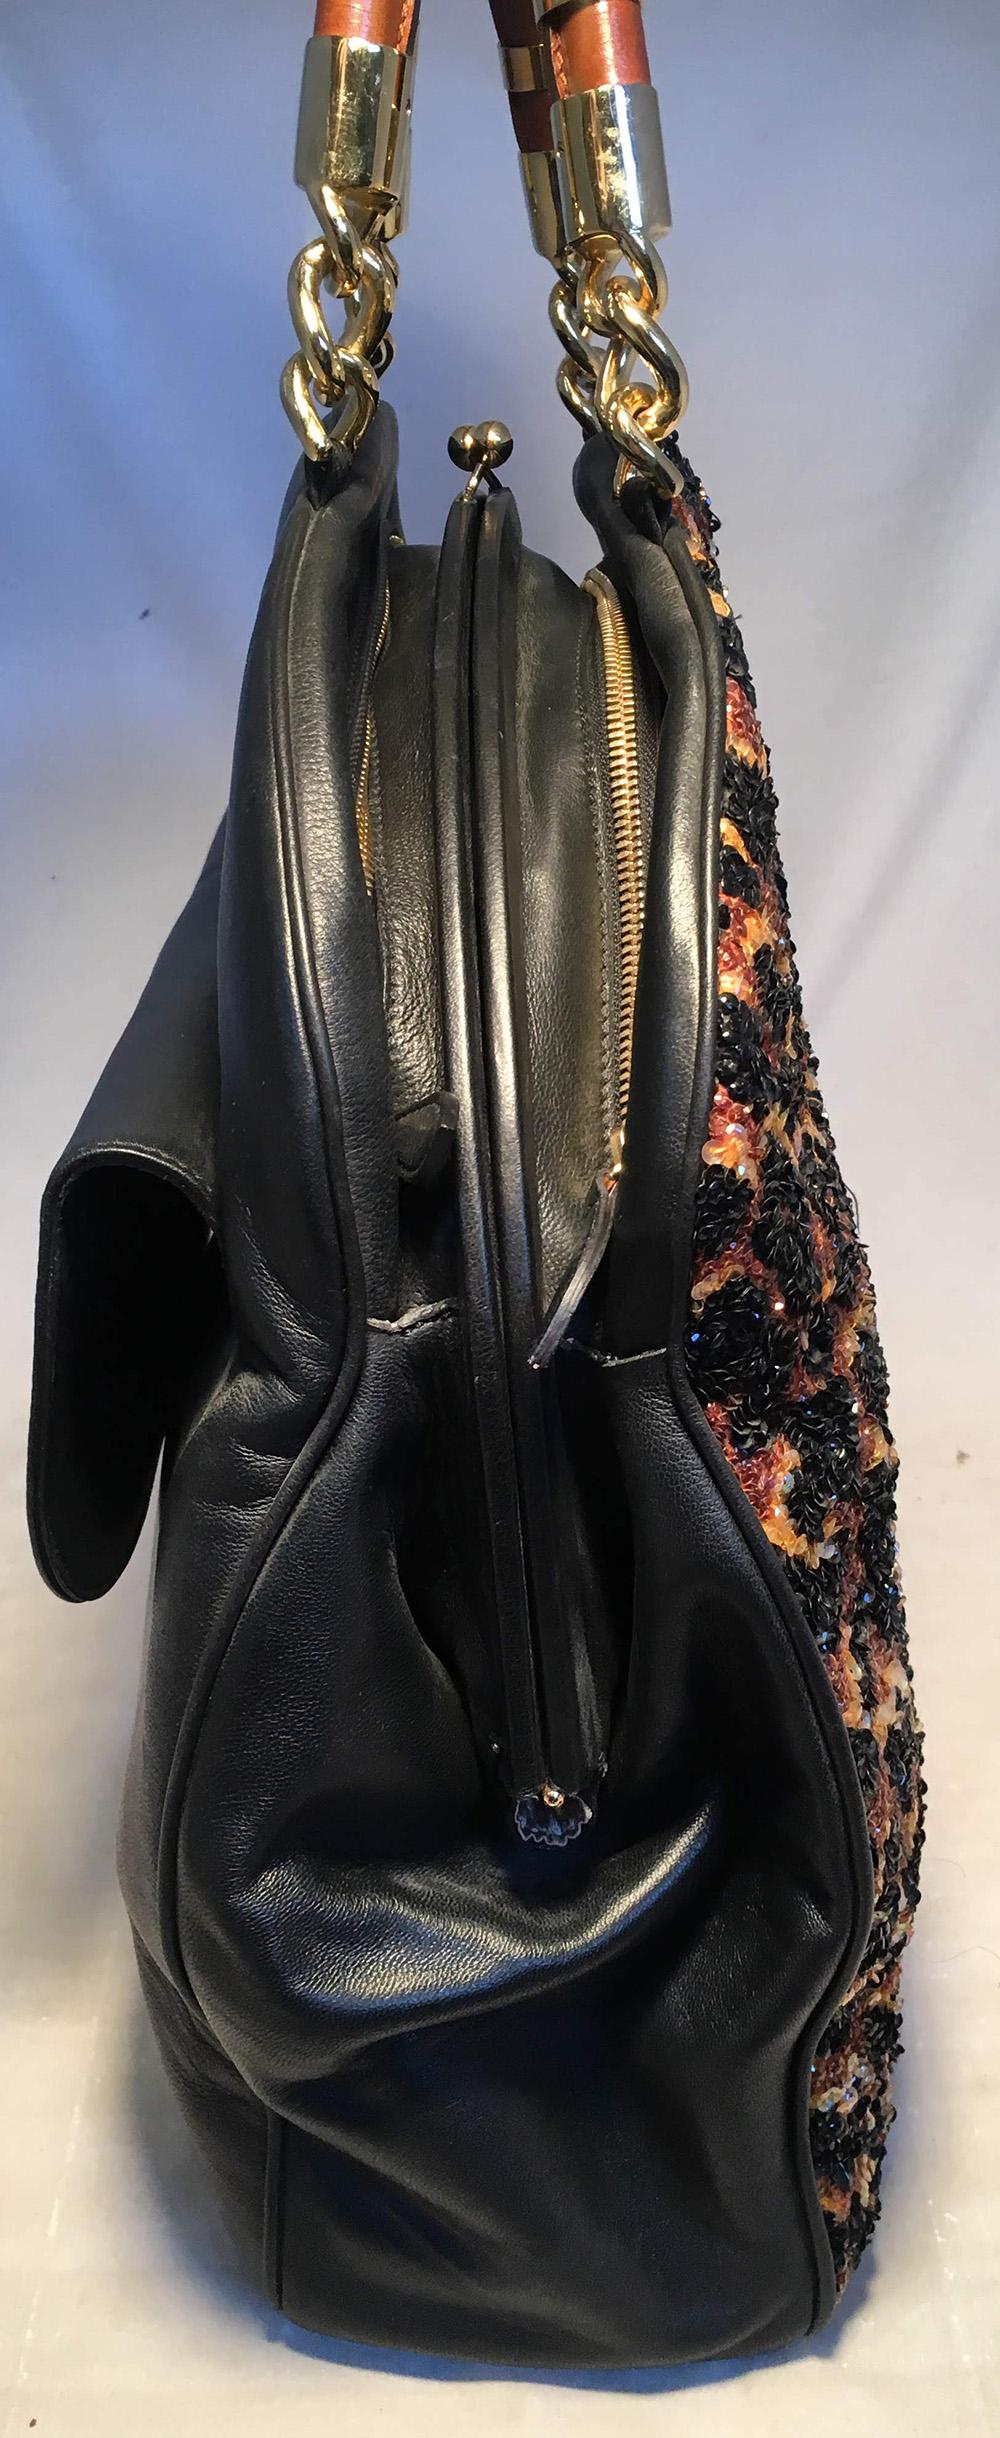 OOAK Abigail Made in Italy Contessa Leopard Beaded Gown Top Handle Leather Tote. One of a kind handmade top handle tote made from a beaded gown owned by an Italian contessa. Beaded leopard print sequin beaded front taken from a gown and turned into